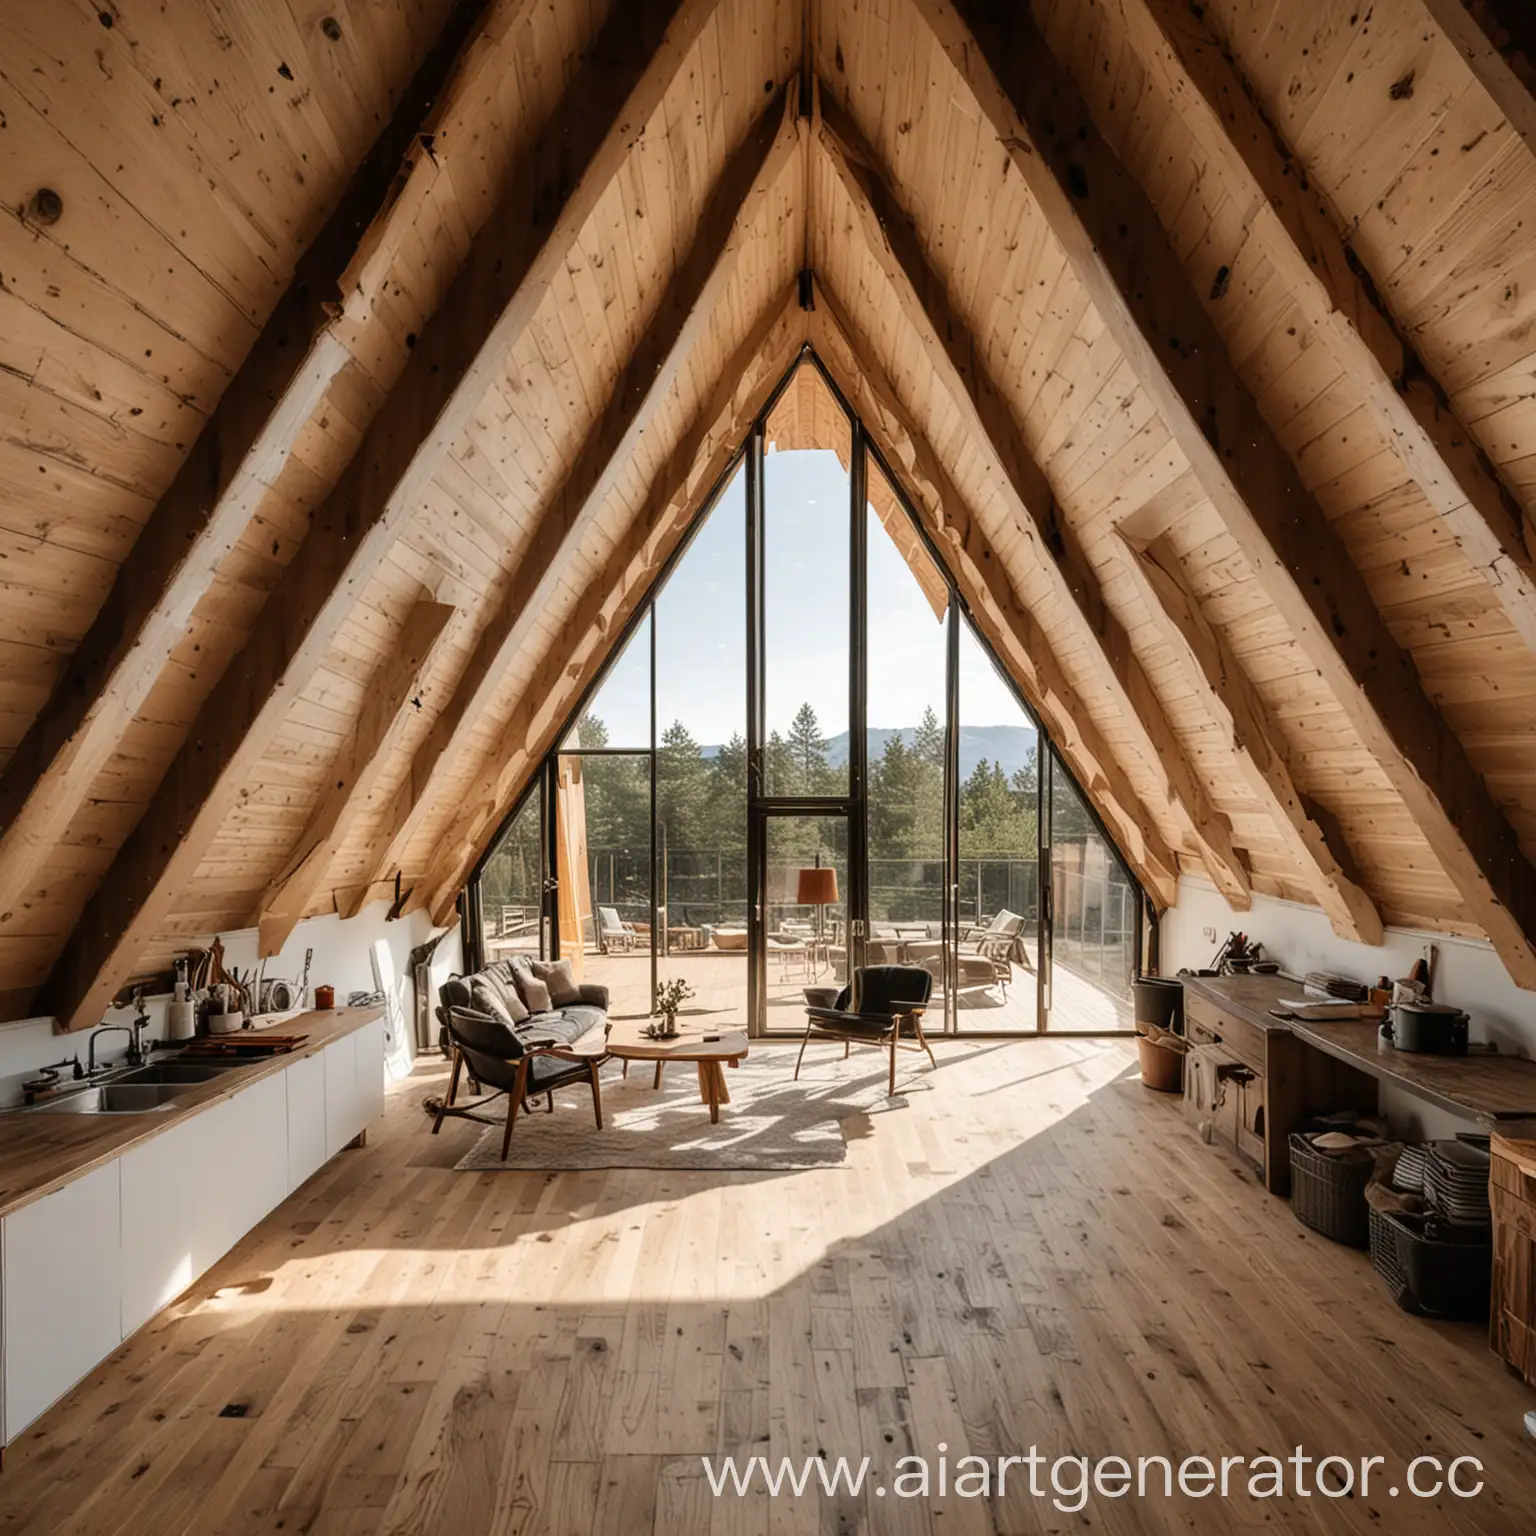 Cozy-Interior-of-AFrame-House-with-Warm-Lighting